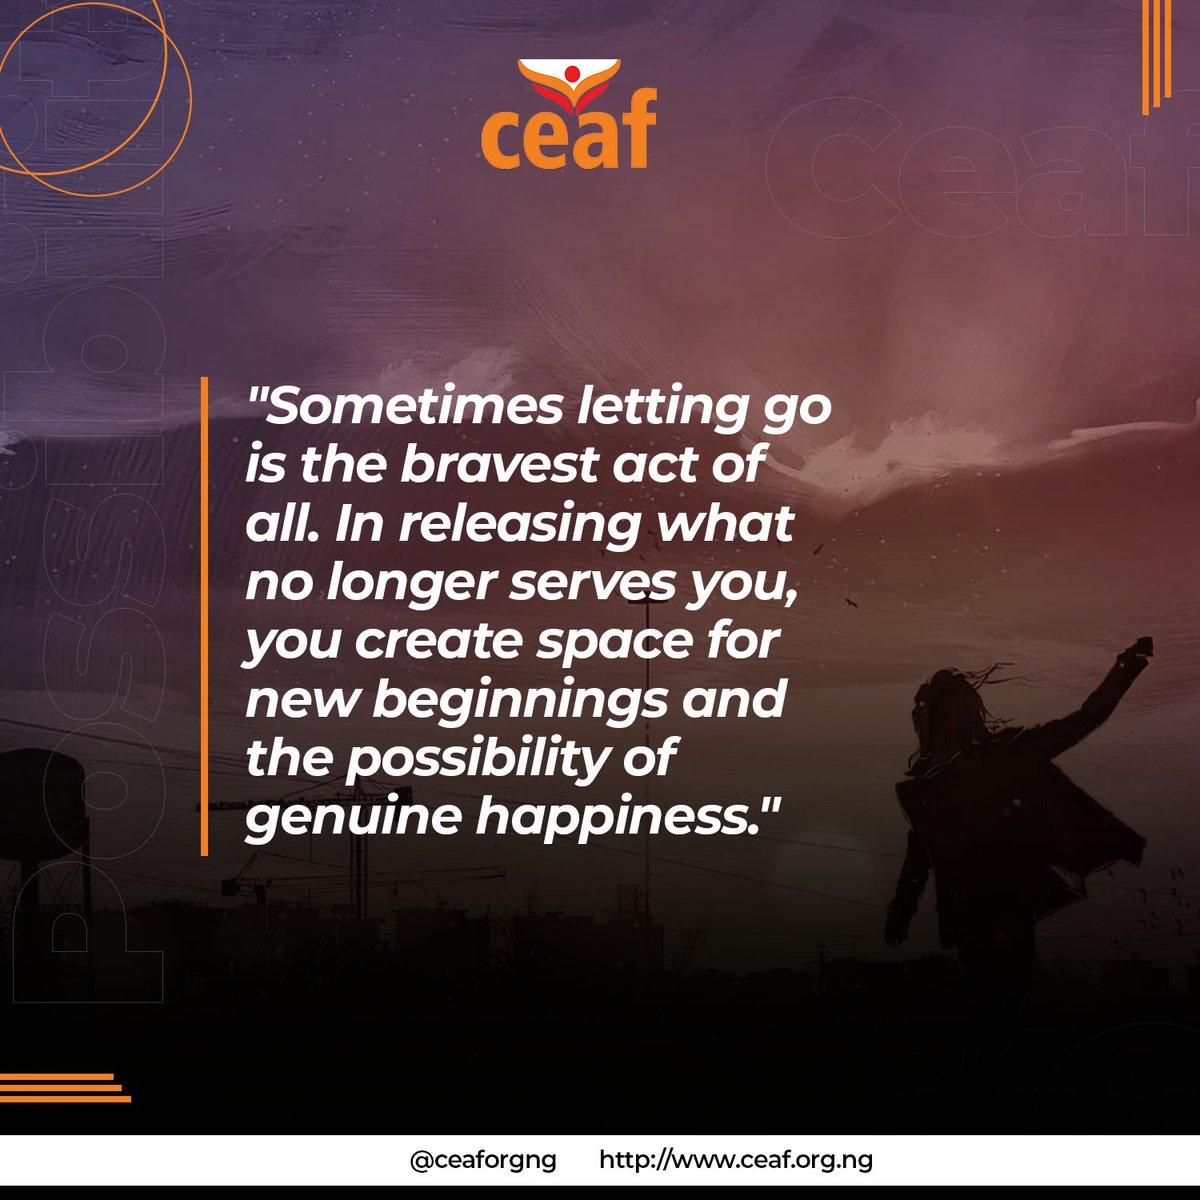 #LeaveToLive #SelfLove #ceafproject #Priority #path #SayNoToDomesticViolence #SayNoToChildMarriage #ceaforgng #speakupspeakout